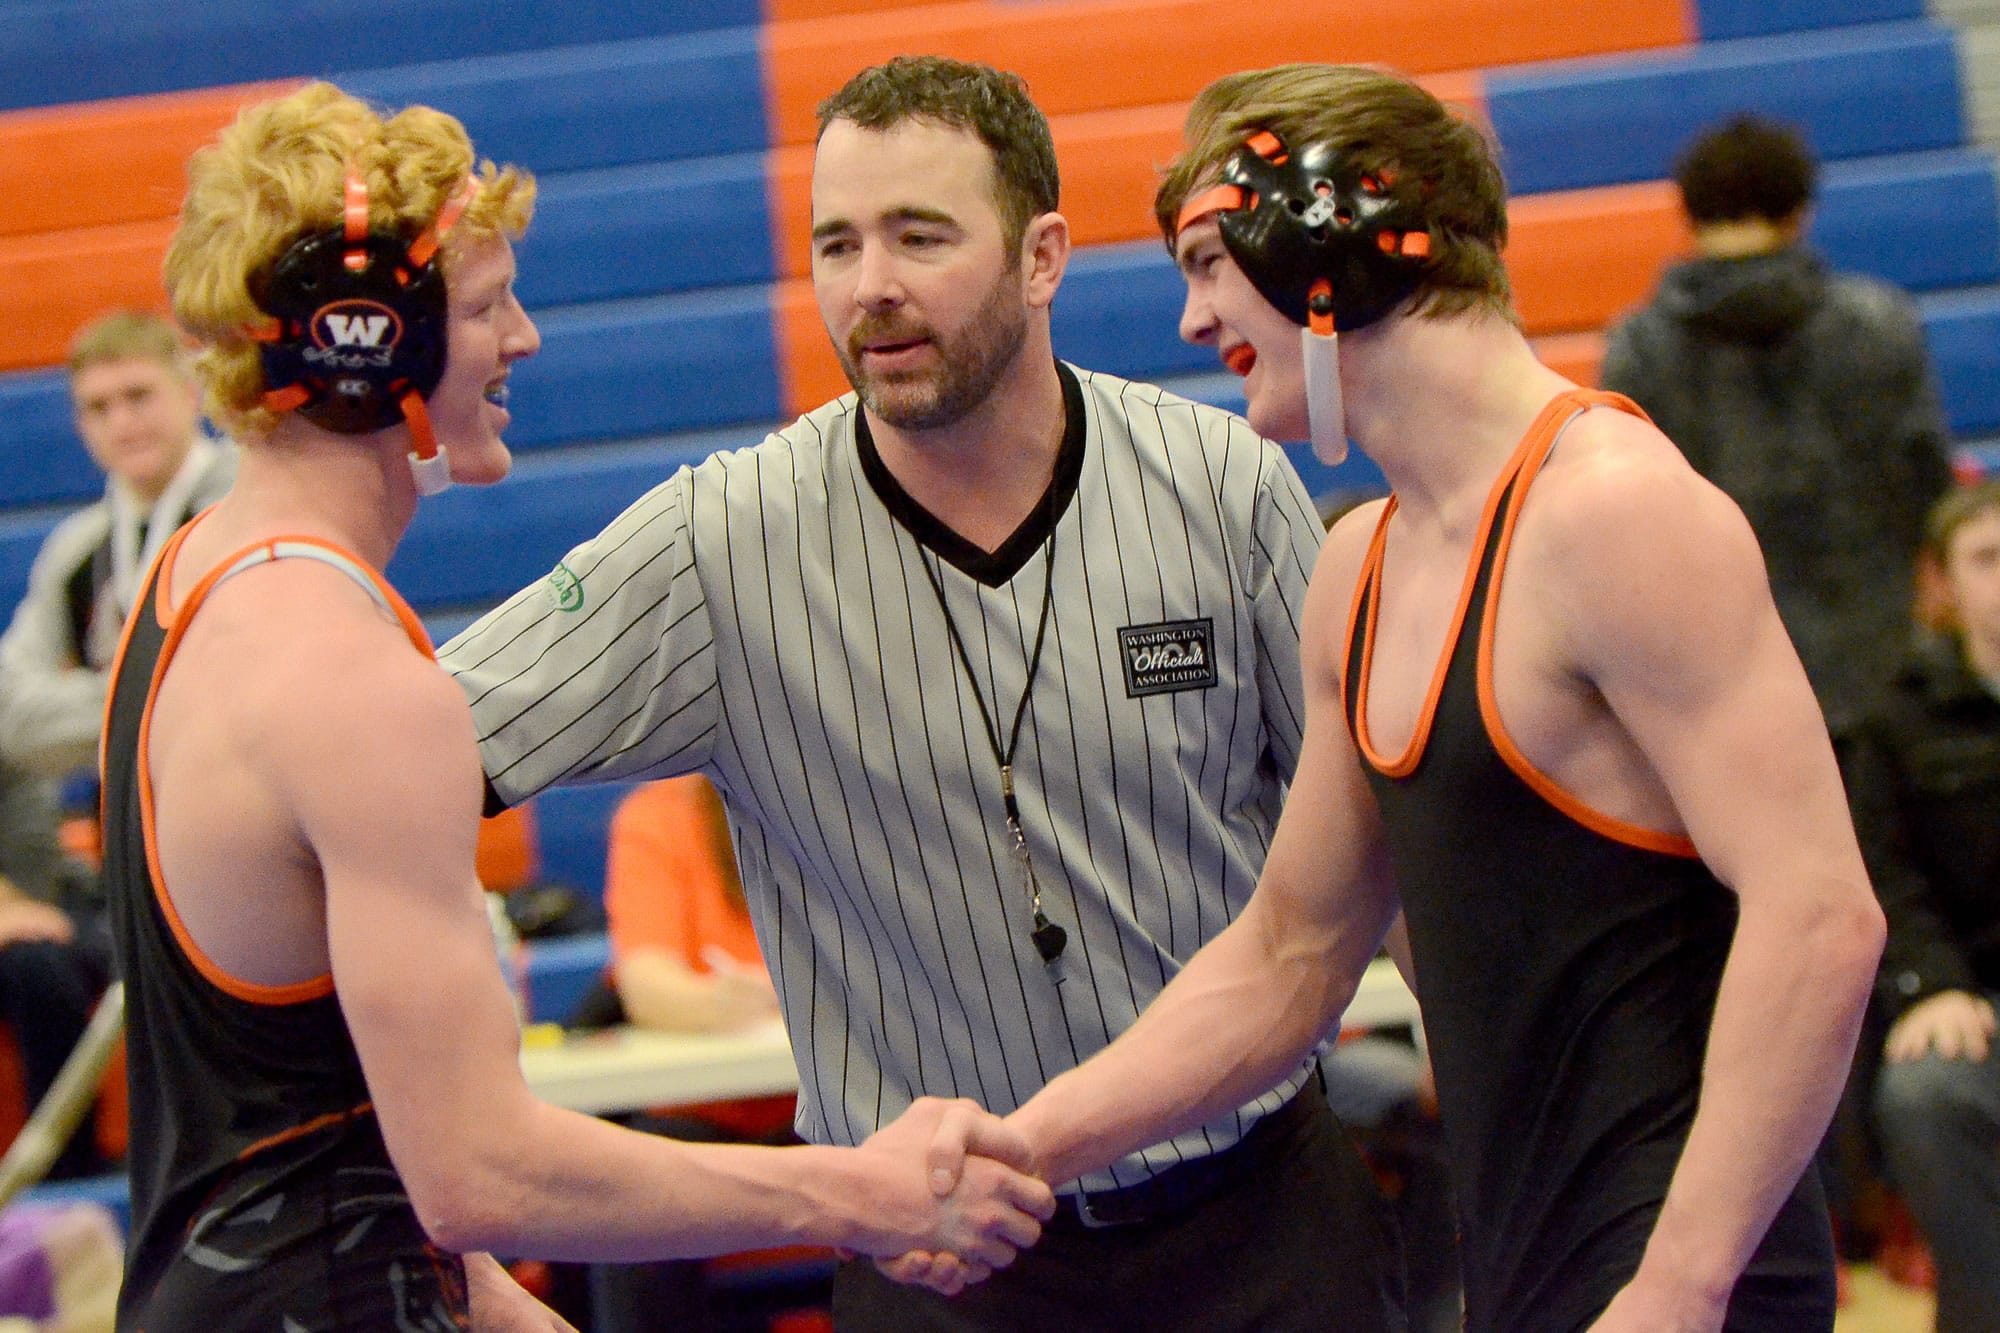 Washougal junior Tanner Lees, left, shakes teammate Nick Wolfe's hand after defeating him to win the 145-pound weight class in the 2A regional finals at Ridgefield High School on Saturday, February 11, 2017.